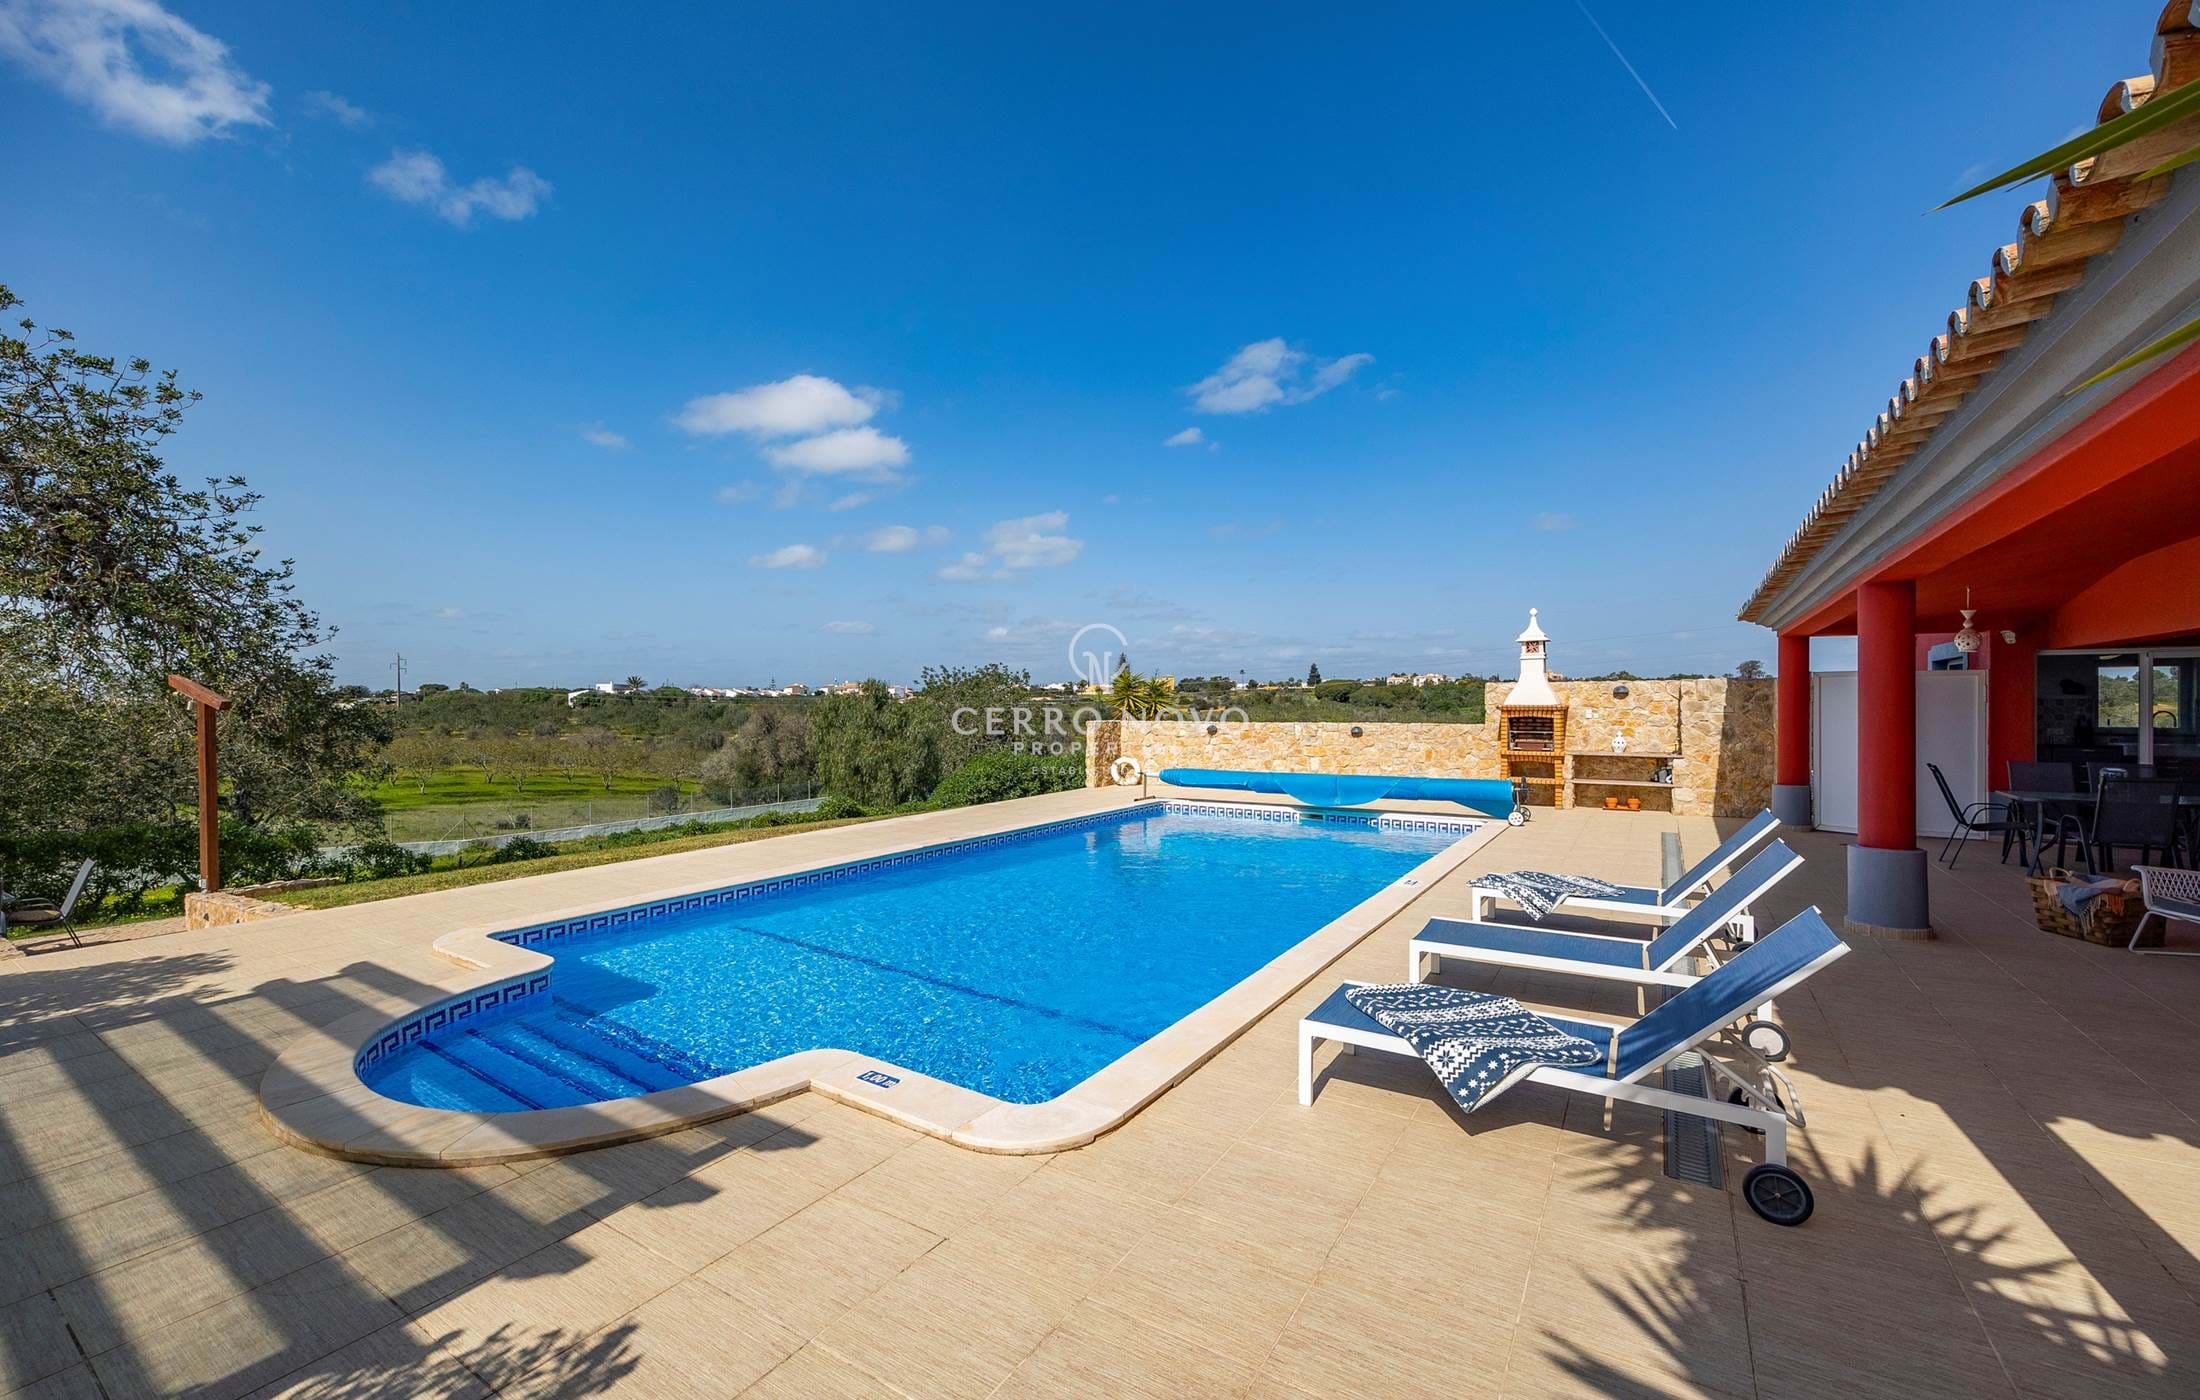 Large, beautifully renovated detached villa with pool & gardens